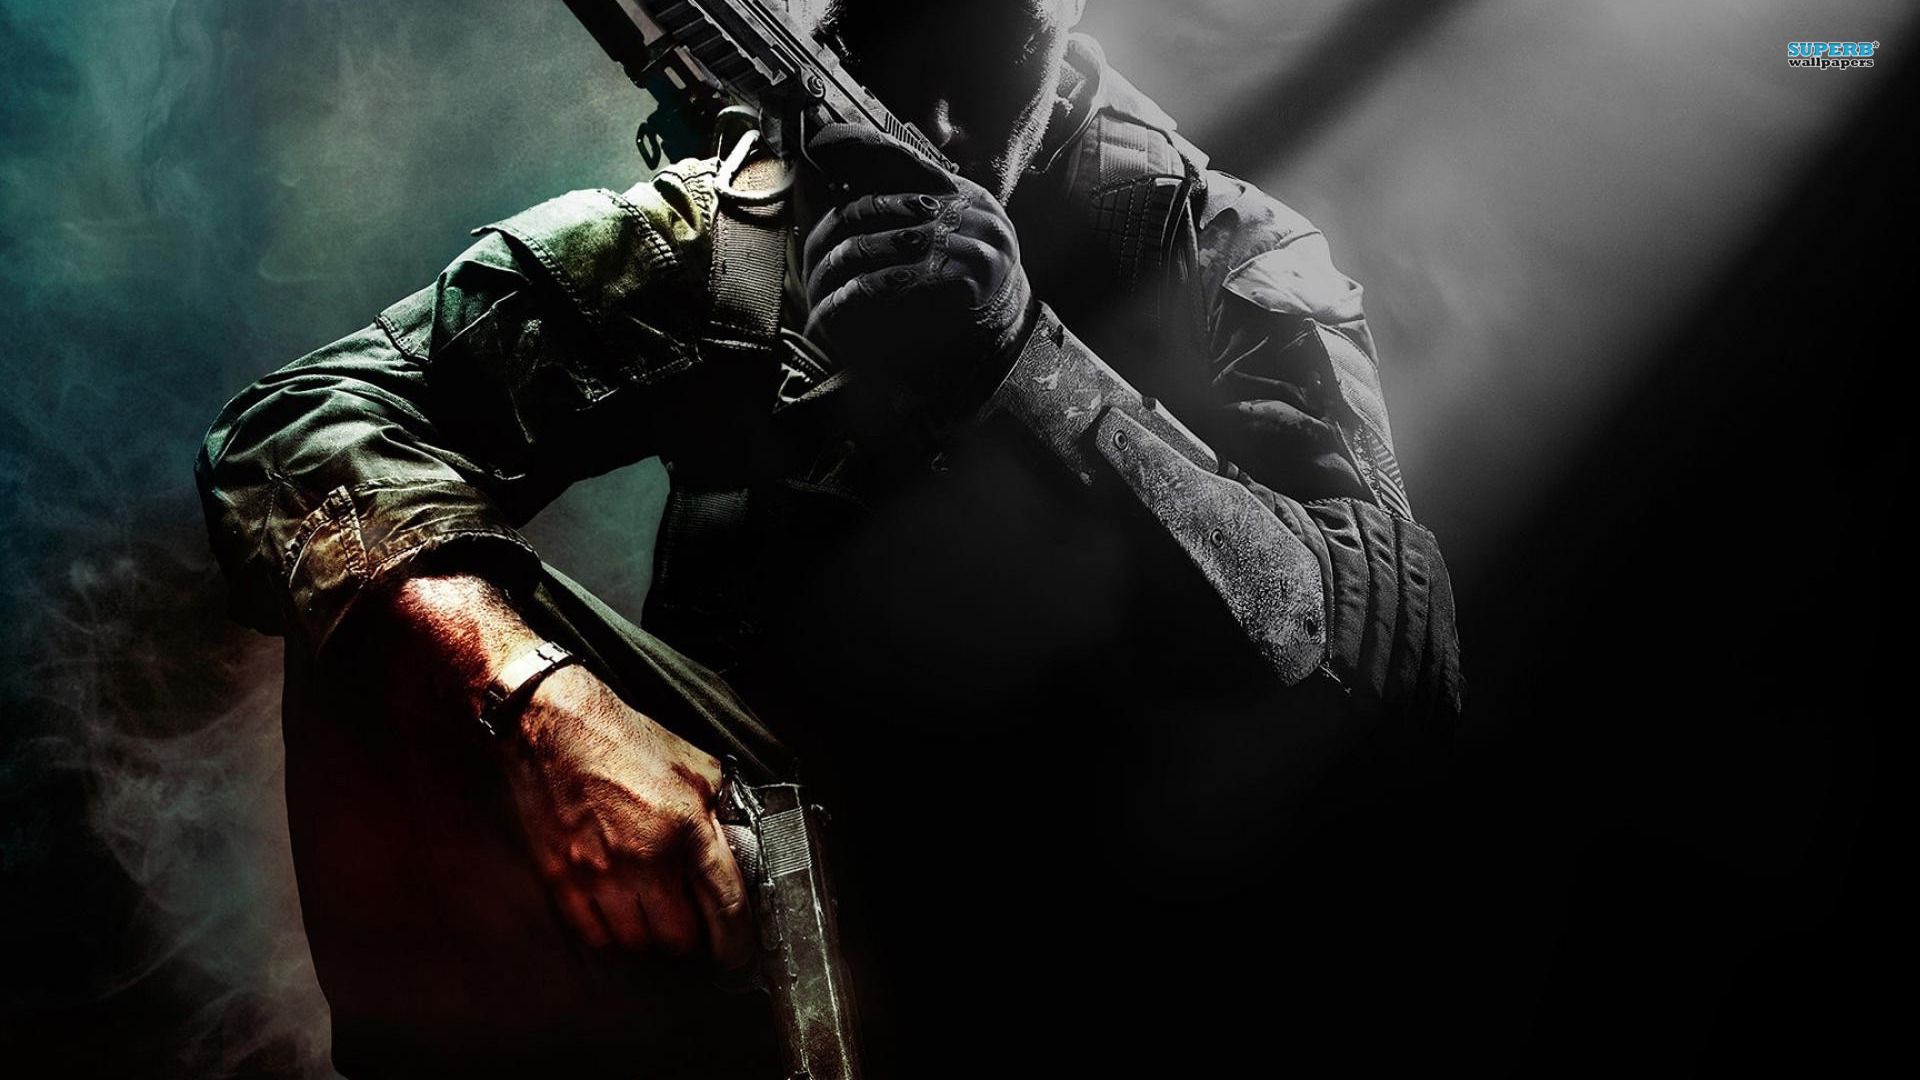 Wallpapers Hd Call Of Duty Group 71